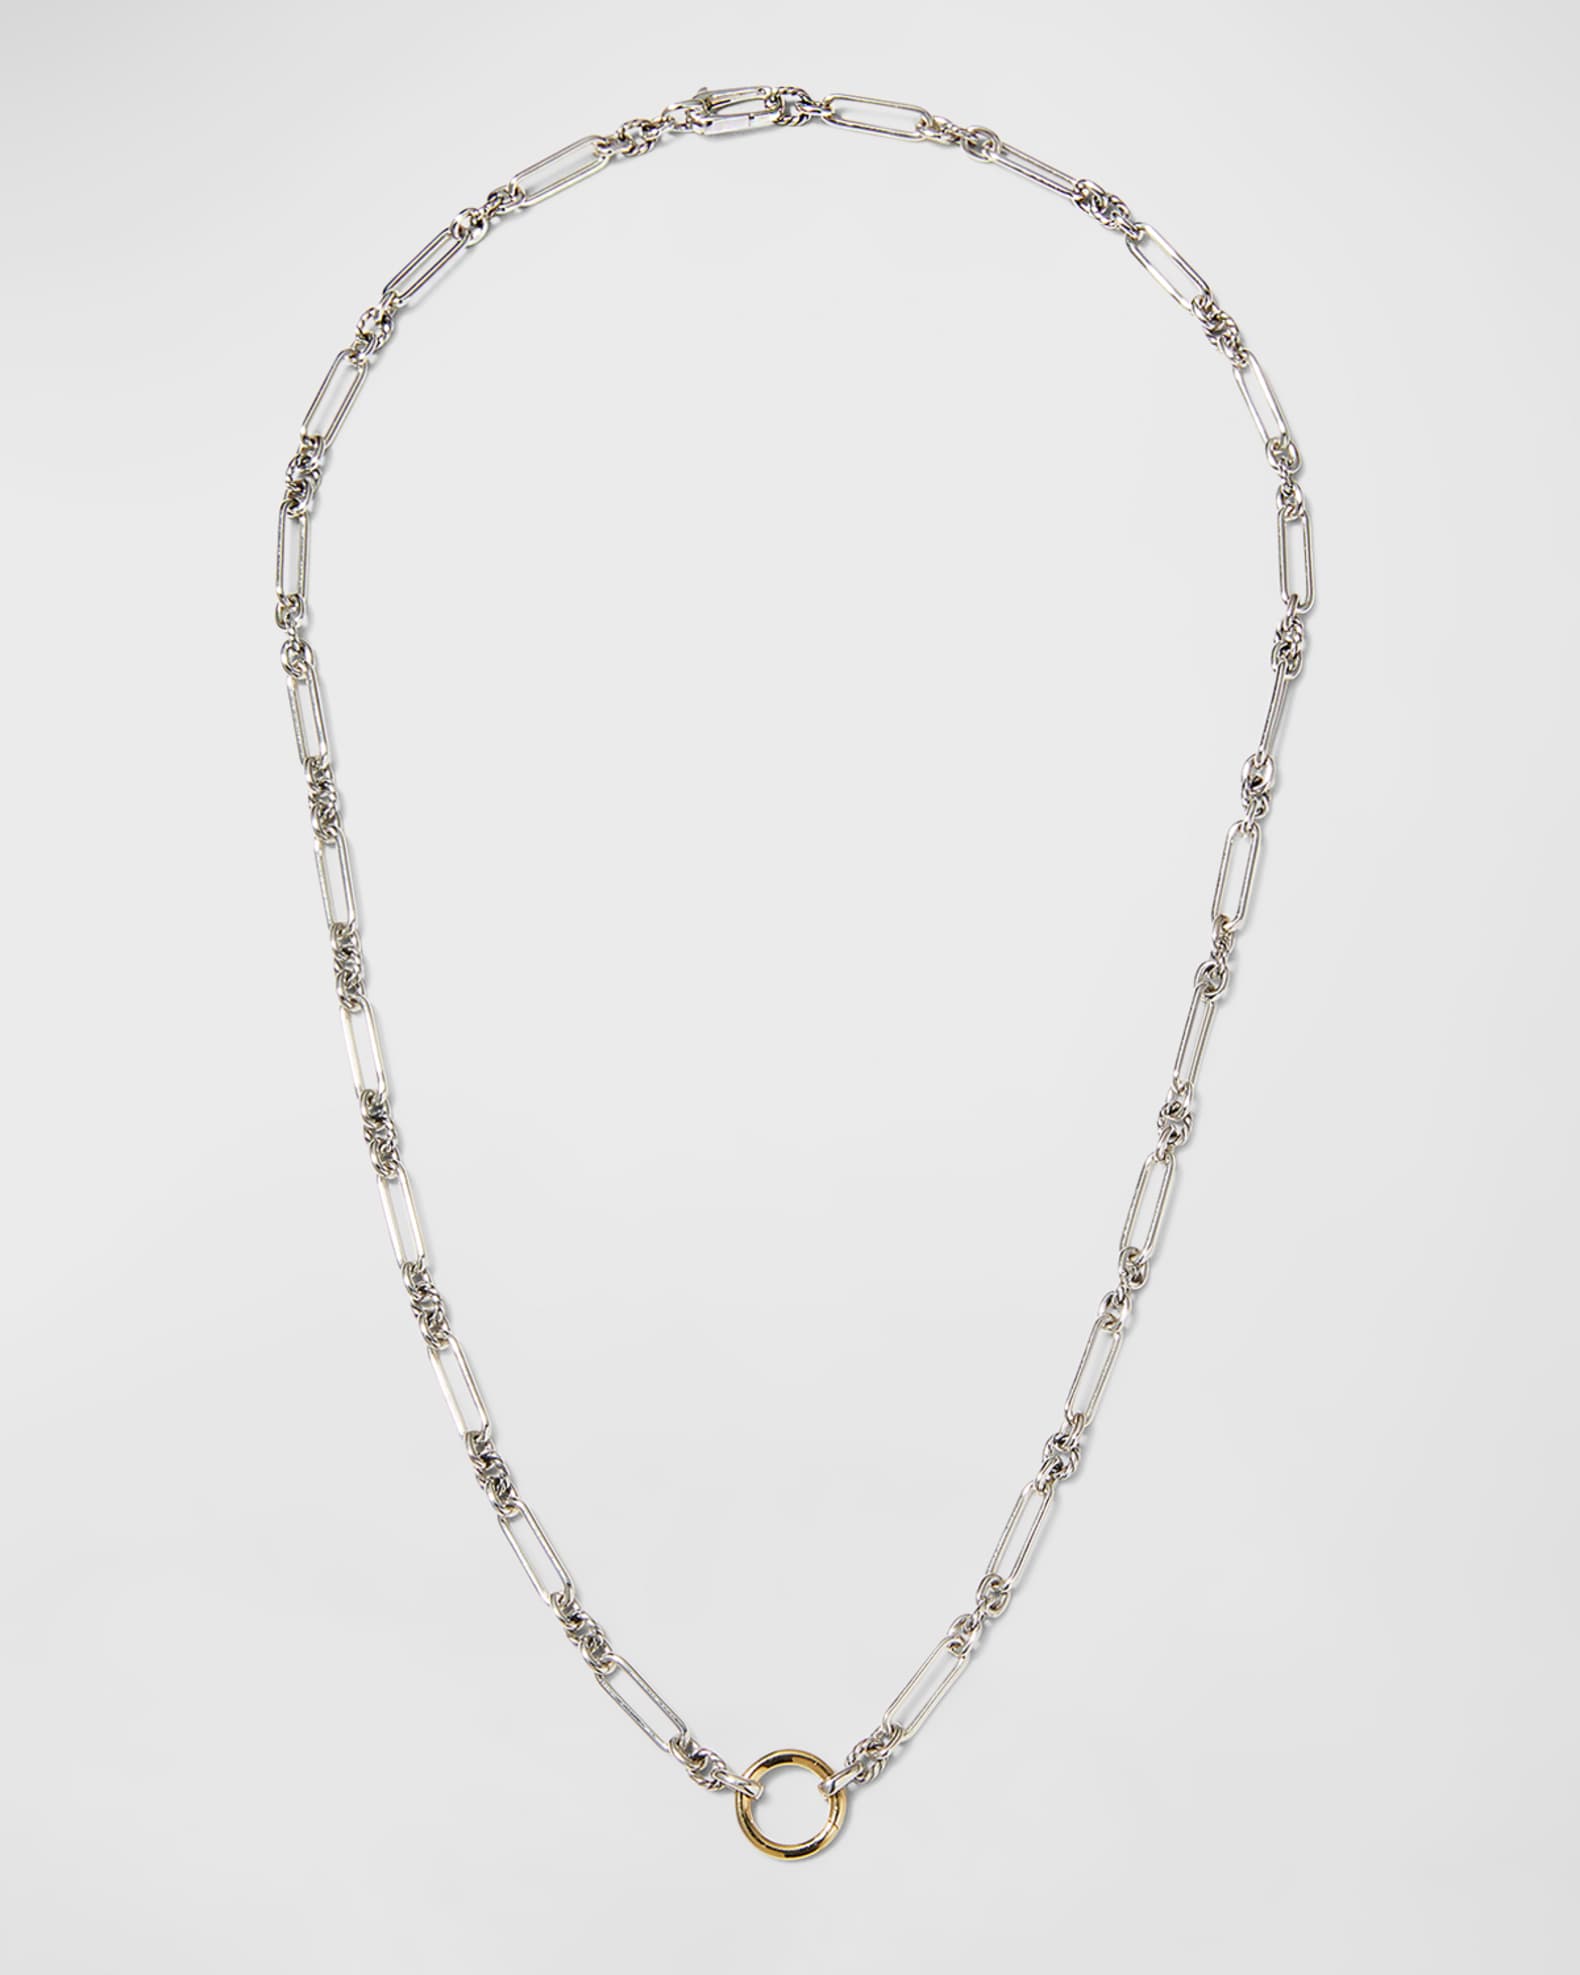 David Yurman Lexington Chain Necklace in Silver with 18K Gold, 4.5mm ...